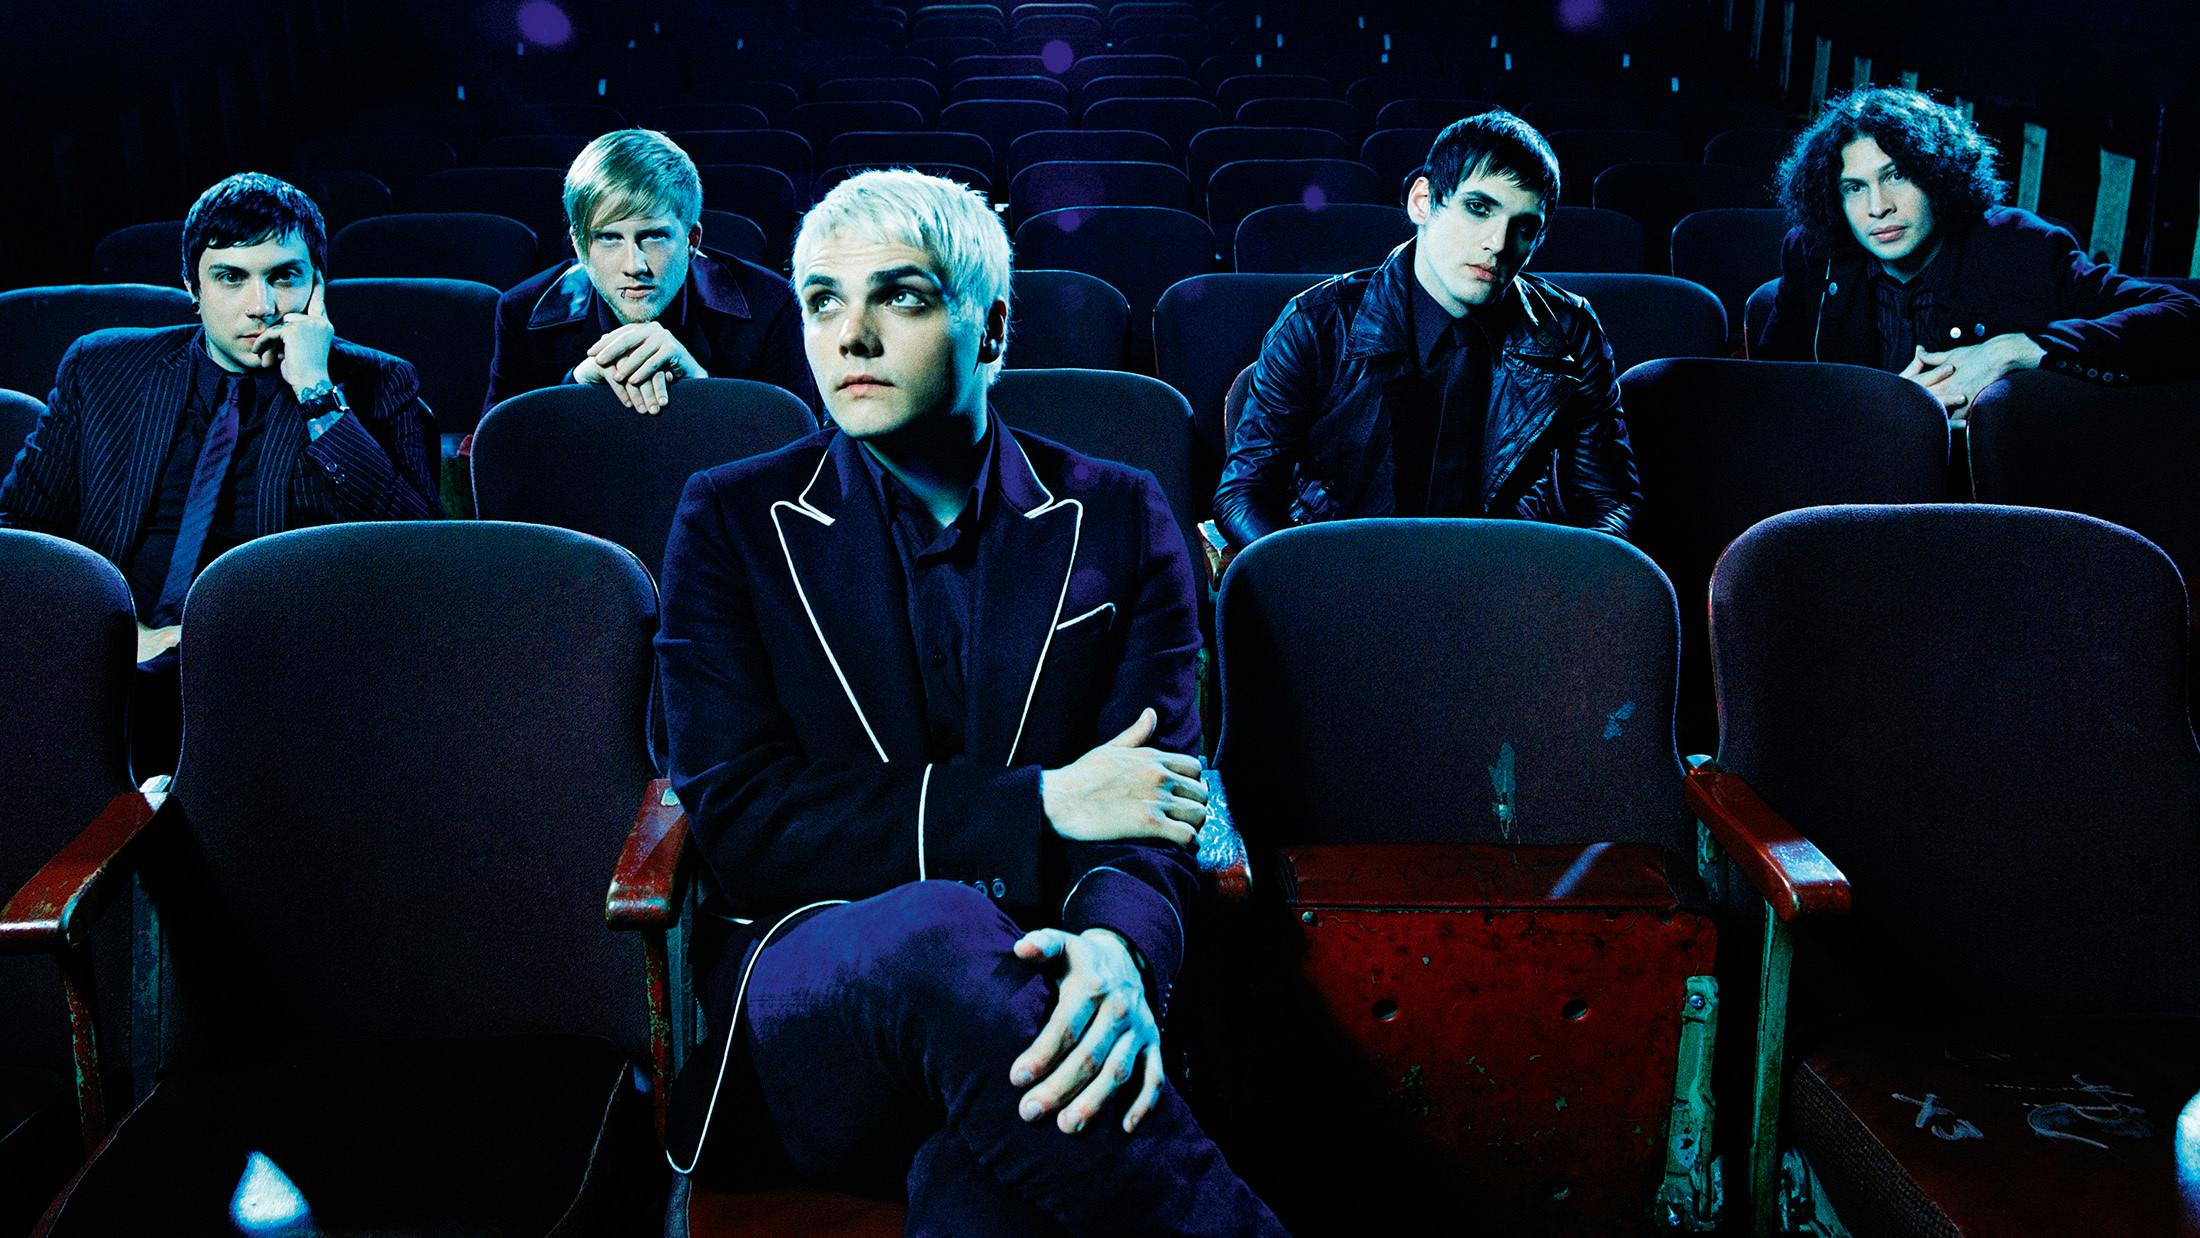 Gerard Way has revealed his favourite song on The Black Parade